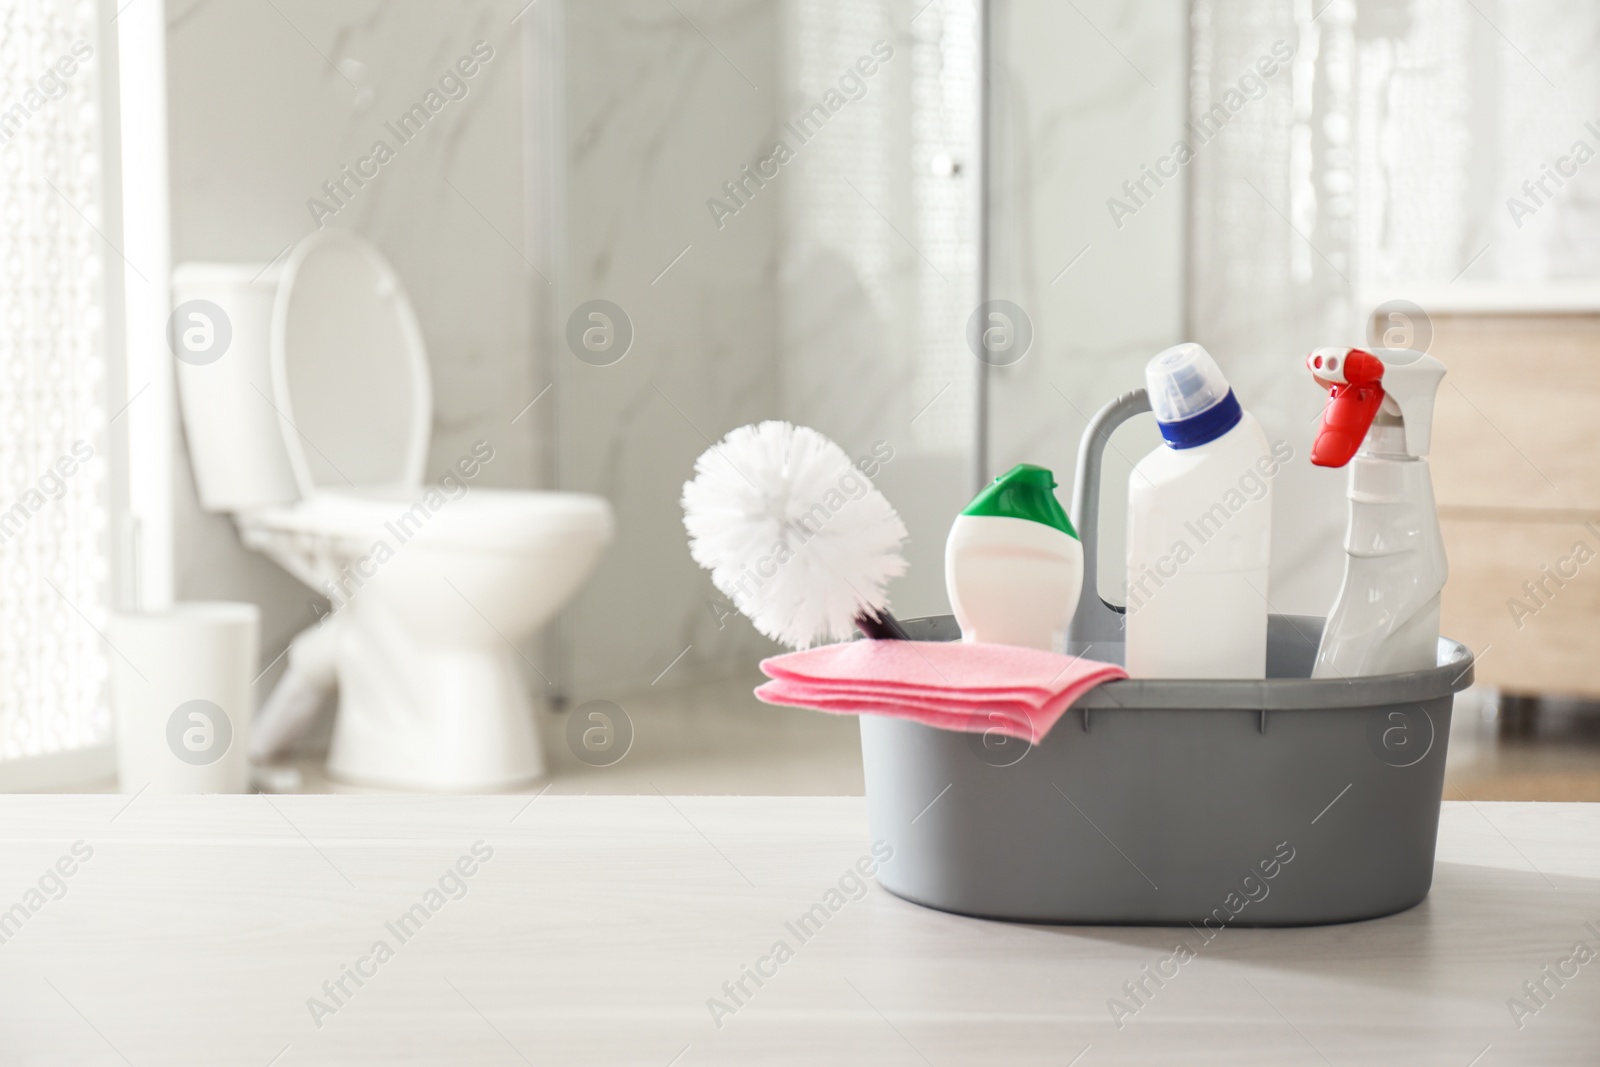 Photo of Cleaning supplies and toilet bowl in bathroom. Space for text